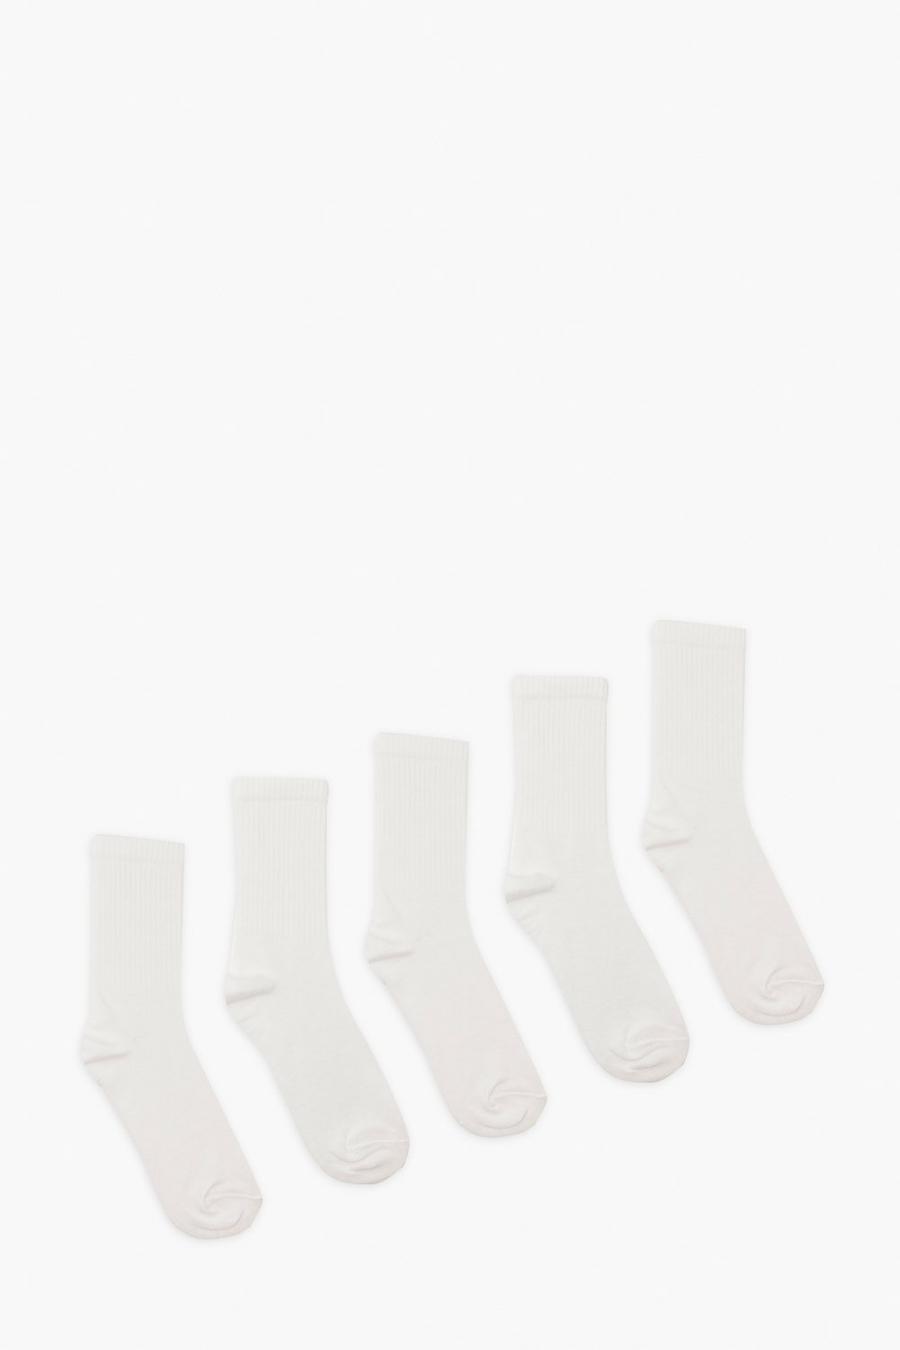 Pack de 5 calcetines deportivos s blancos, White image number 1